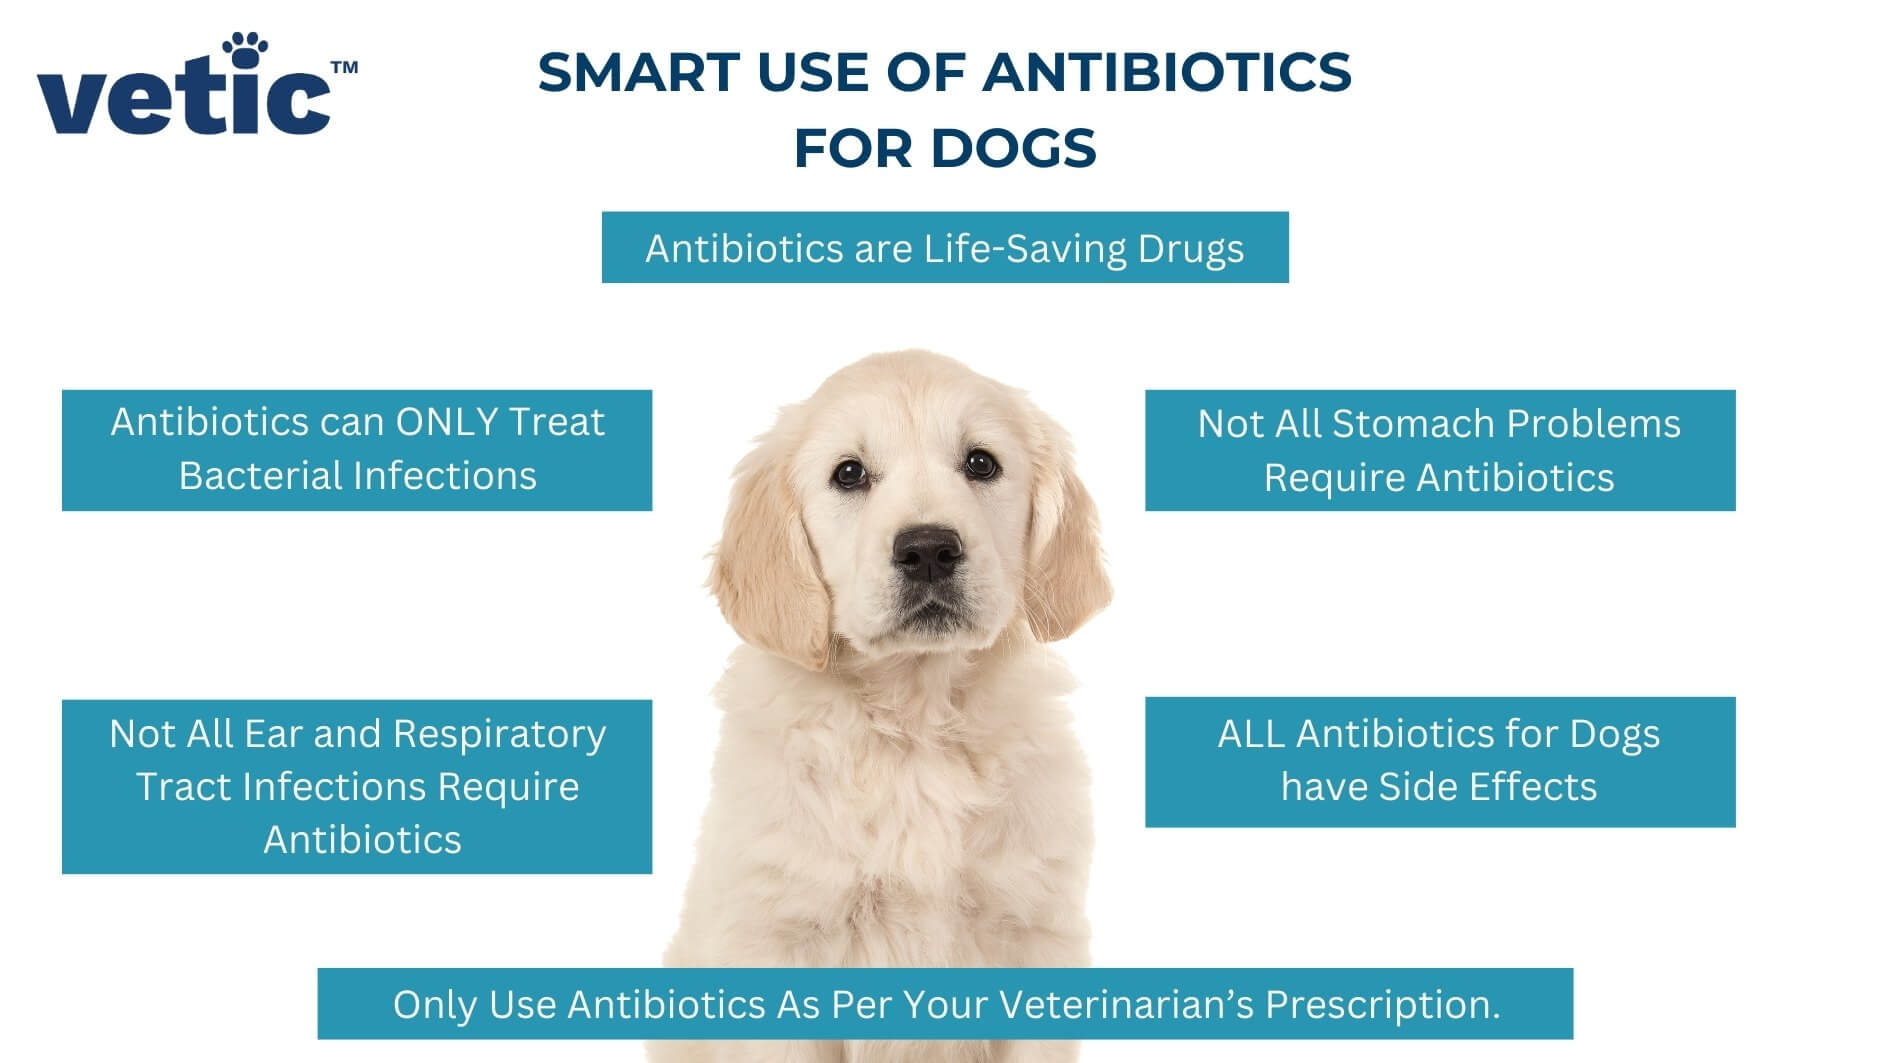 Infographic on Smart Use of Antibiotics for Dogs Antibiotics are Life-Saving Drugs Antibiotics can ONLY Treat Bacterial Infections Not All Ear and Respiratory Tract Infections Require Antibiotics Not All Stomach Problems Require Antibiotics ALL Antibiotics for Dogs have Side Effects Only Use Antibiotics As Per Your Veterinarian’s Prescription.